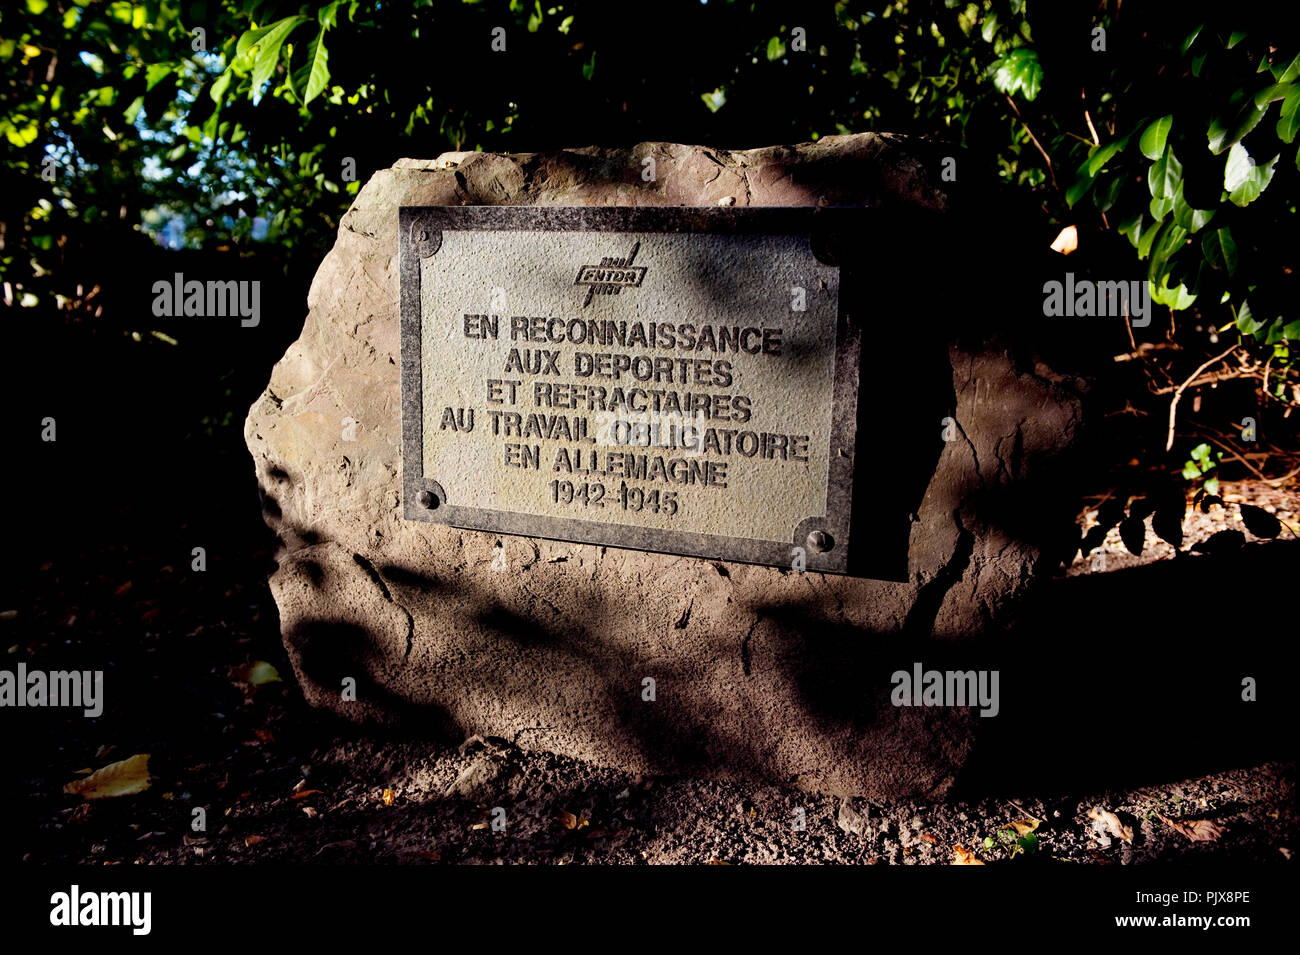 The memorial stone in memory of the deported and objectors during the Second World War in 1942-1945 in Huy (Belgium, 29/09/2011) Stock Photo